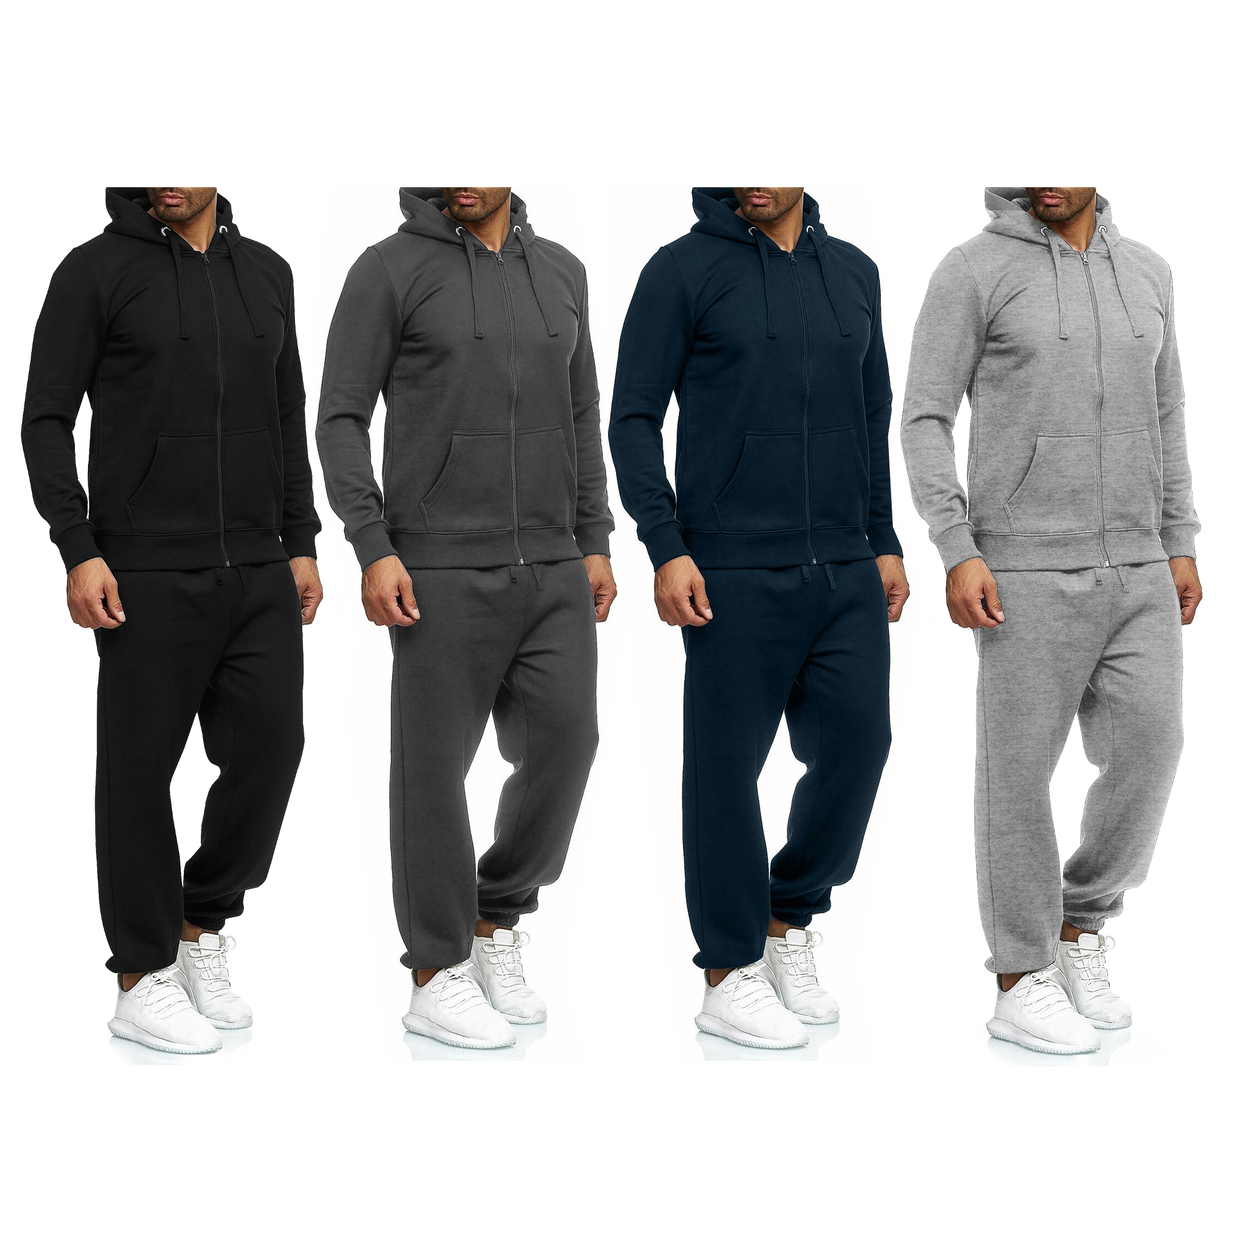 Multi-Pack: Men's Casual Big & Tall Athletic Active Winter Warm Fleece Lined Full Zip Tracksuit Jogger Set - Black, 2-pack, Xx-large